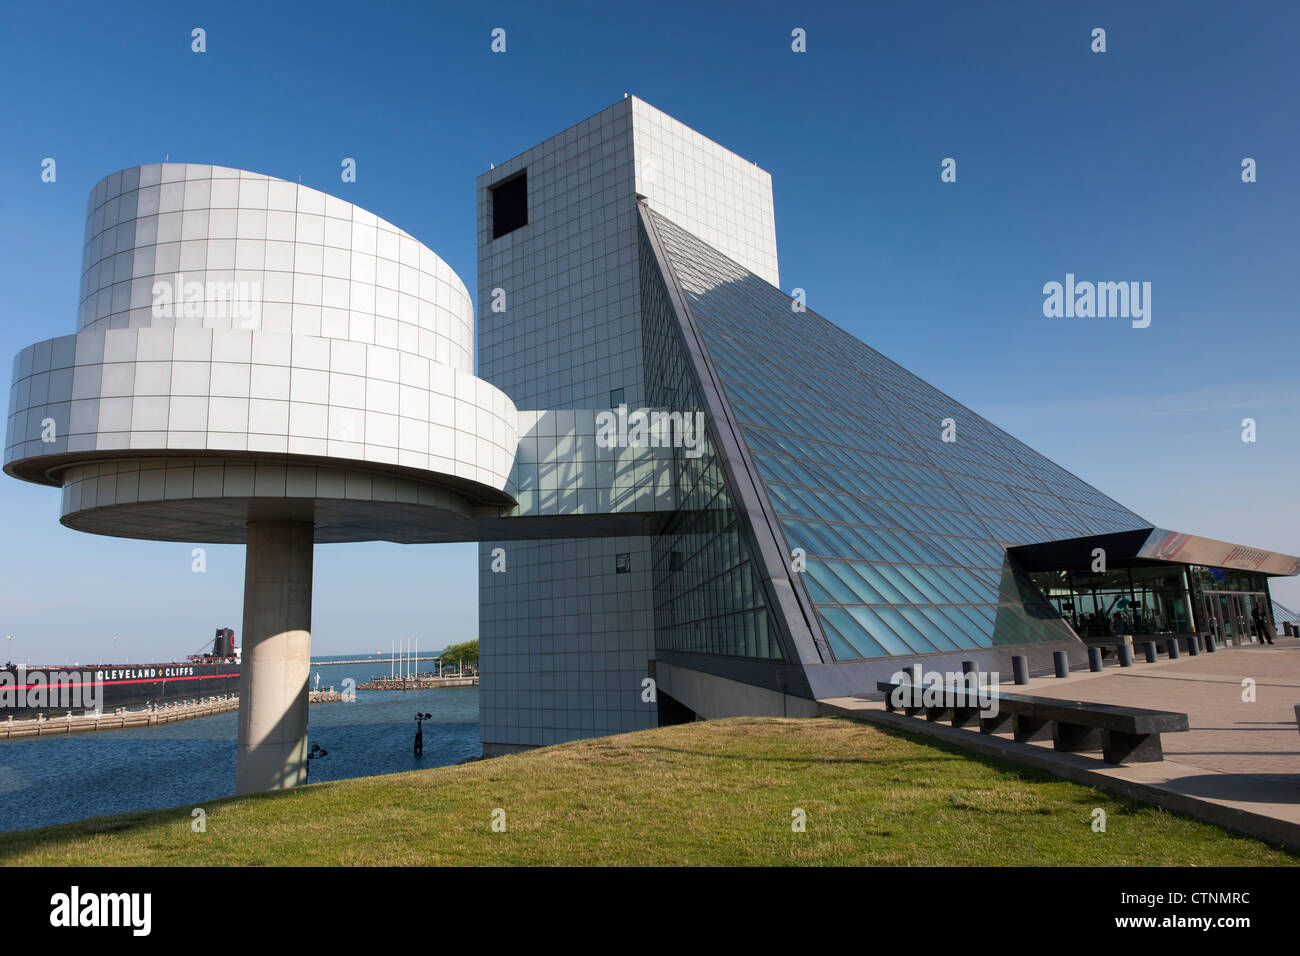 Die Rock And Roll Hall Of Fame in Cleveland, Ohio. Stockfoto